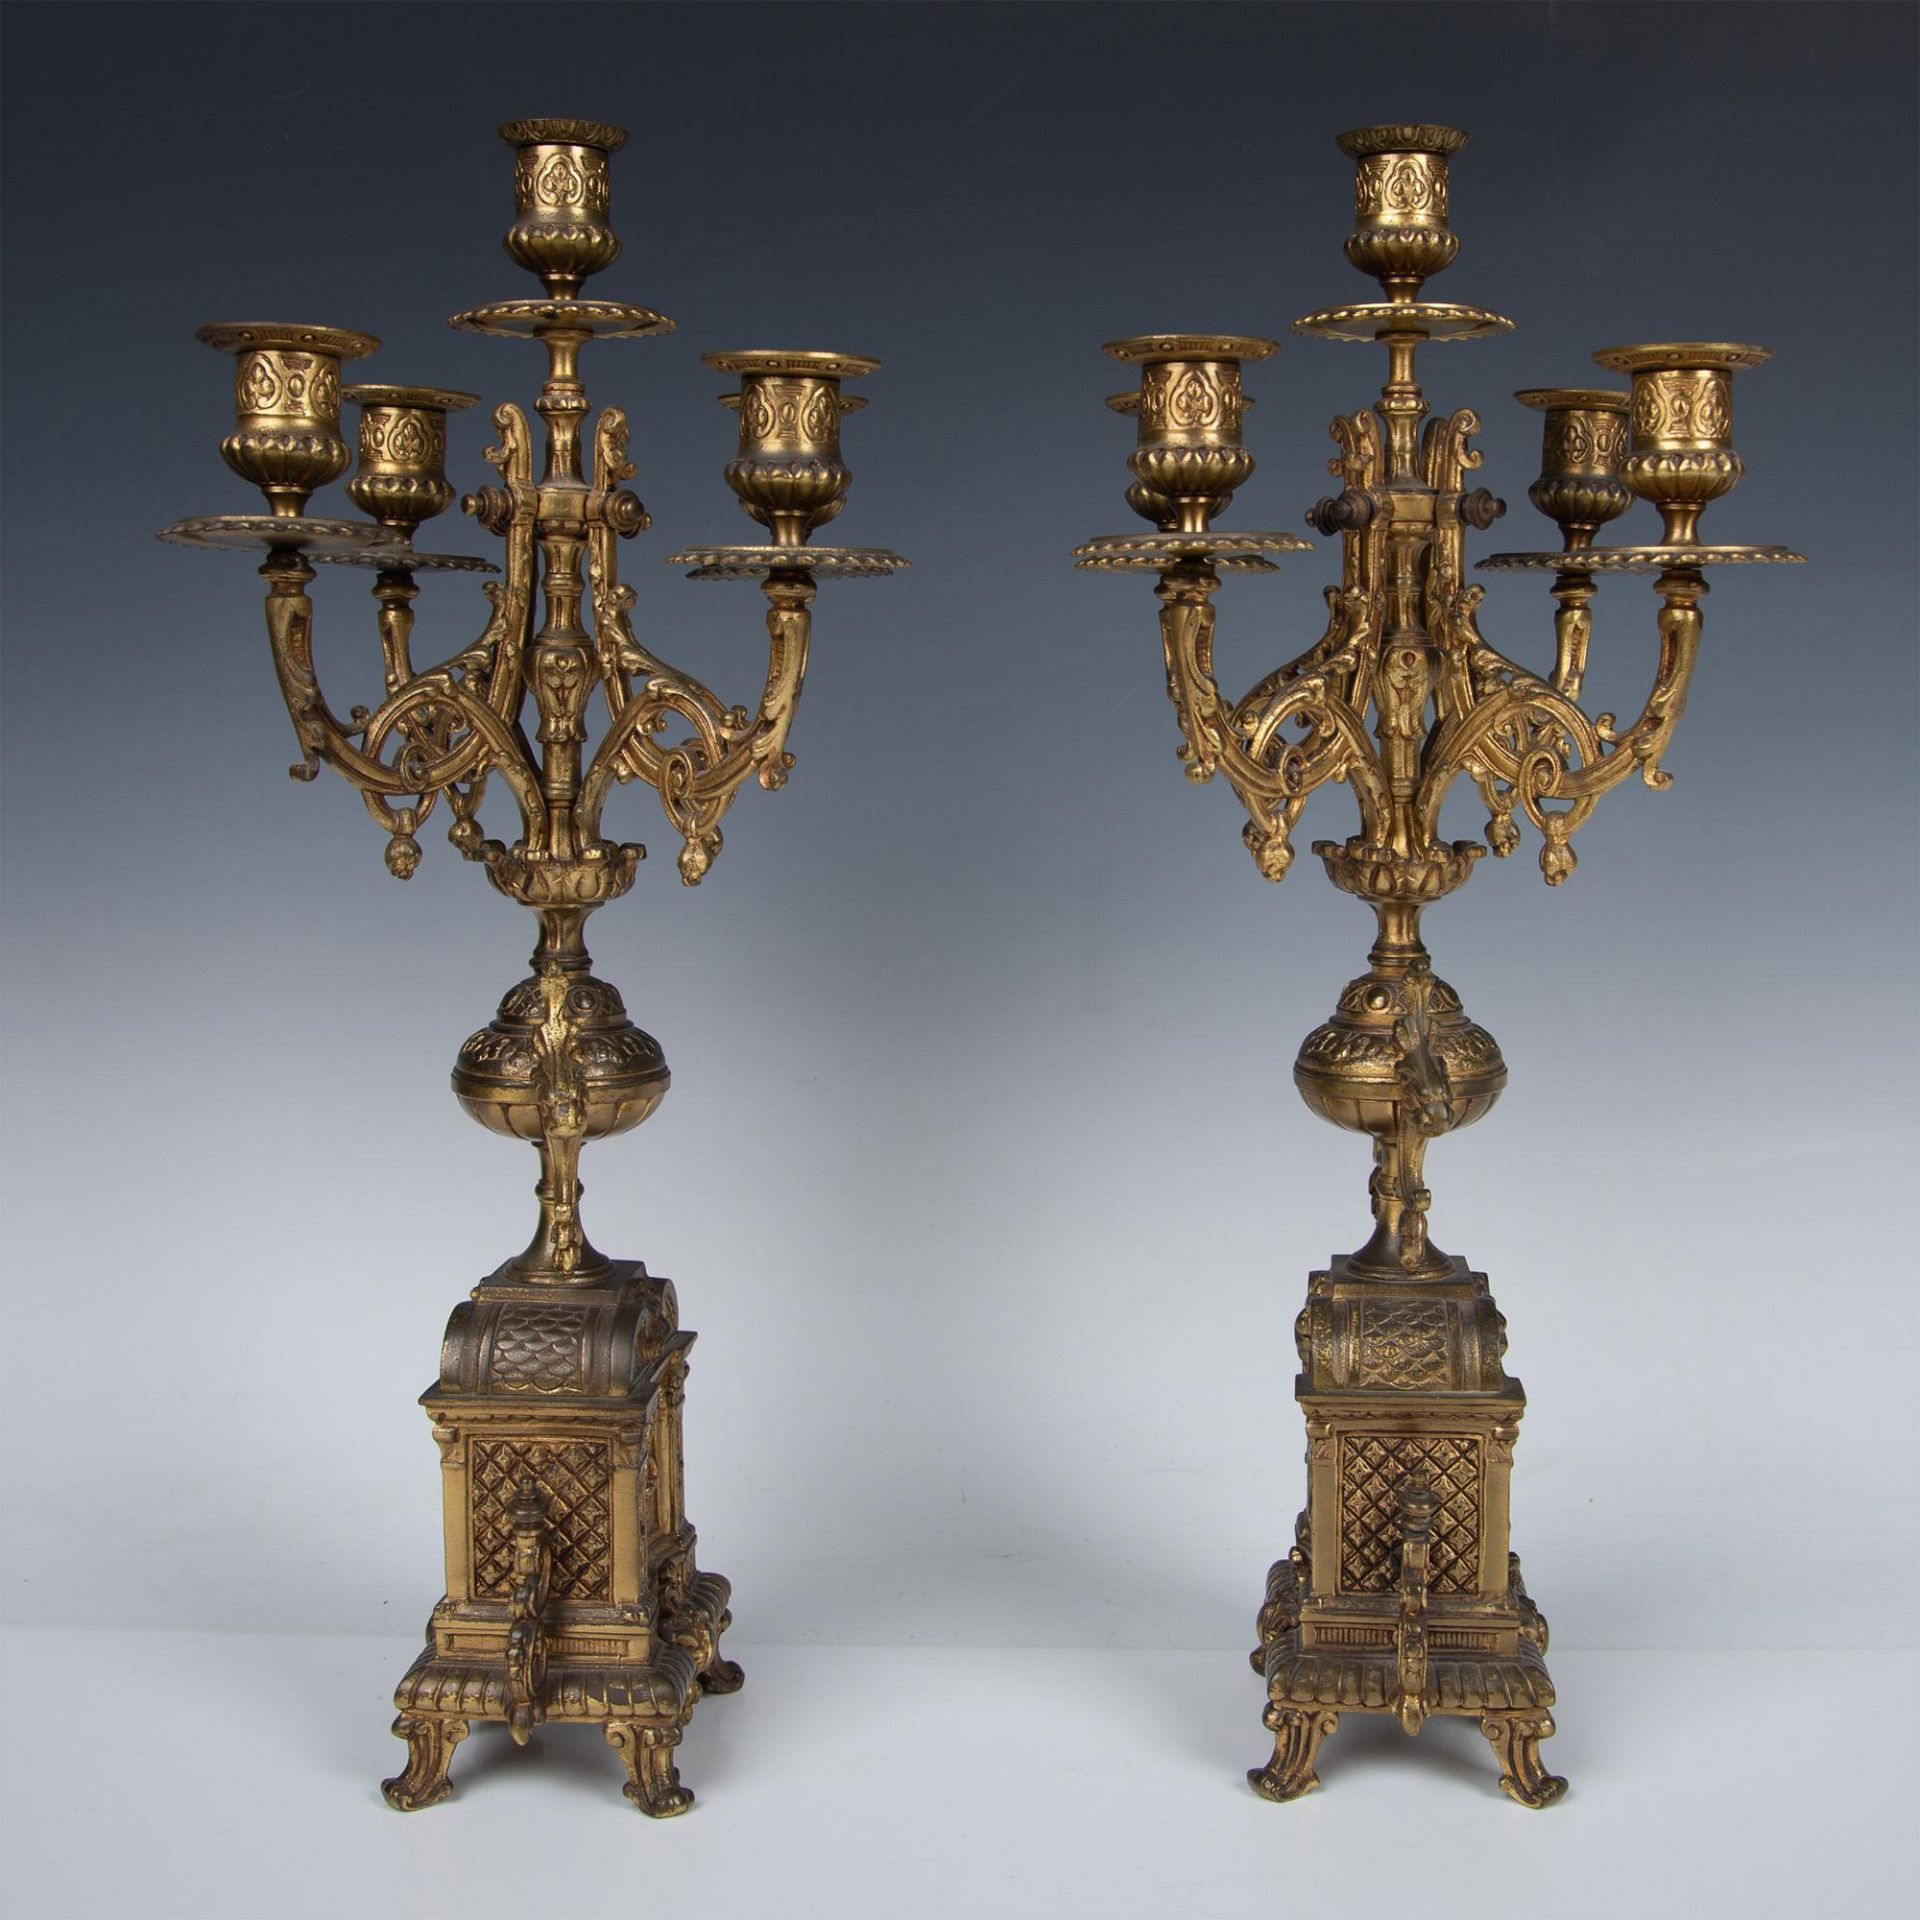 Pair of Brass Baroque Style Mantel Candelabras - Image 2 of 7